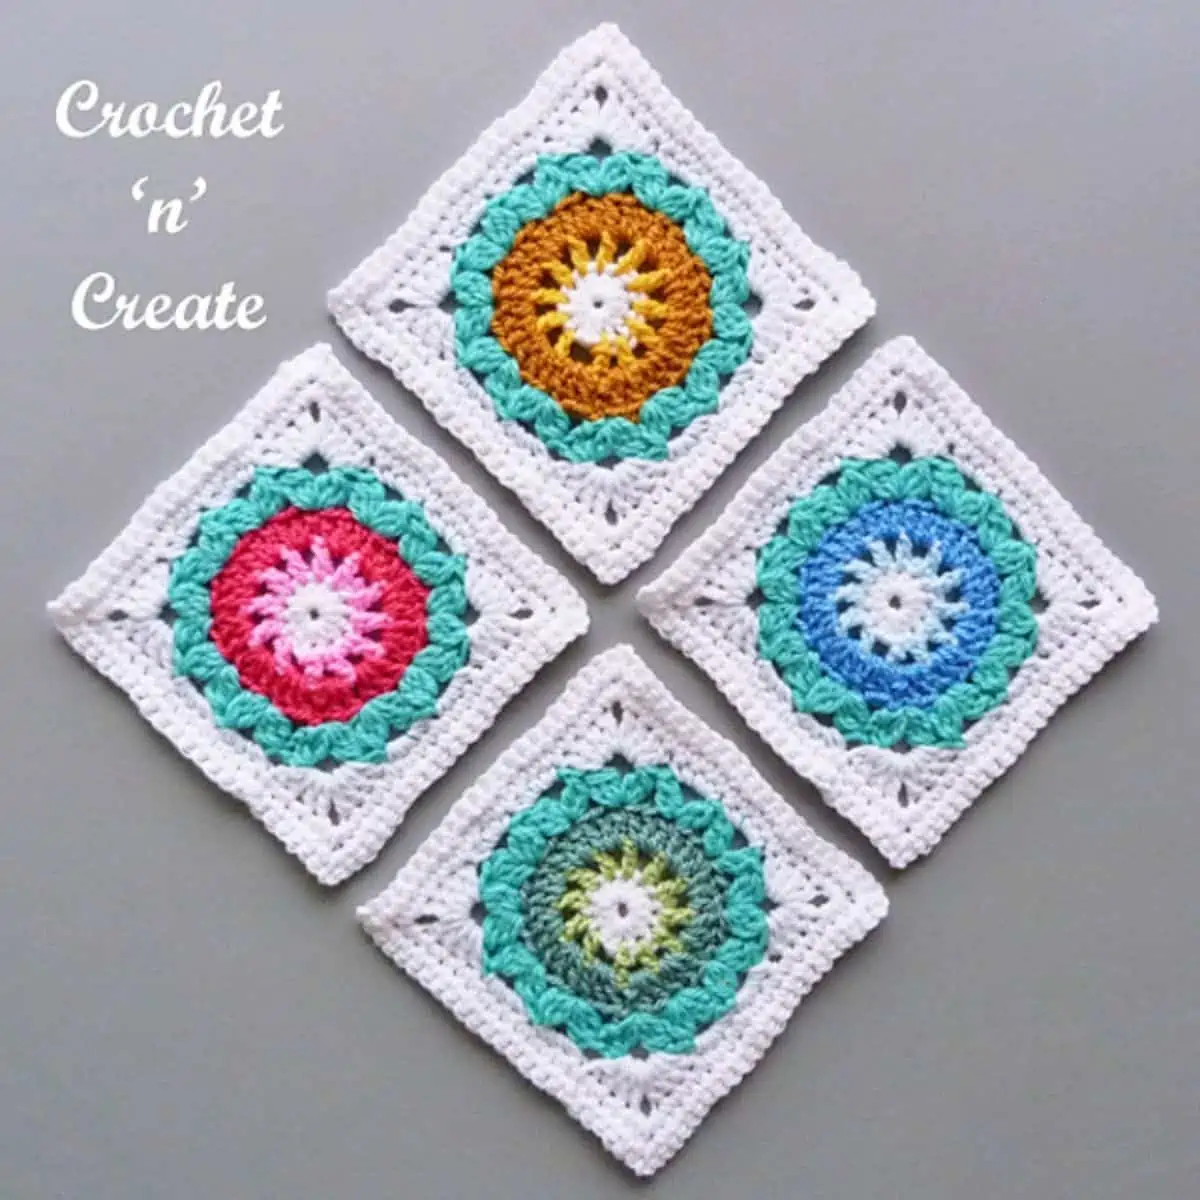 4 white granny squares with colorful centers